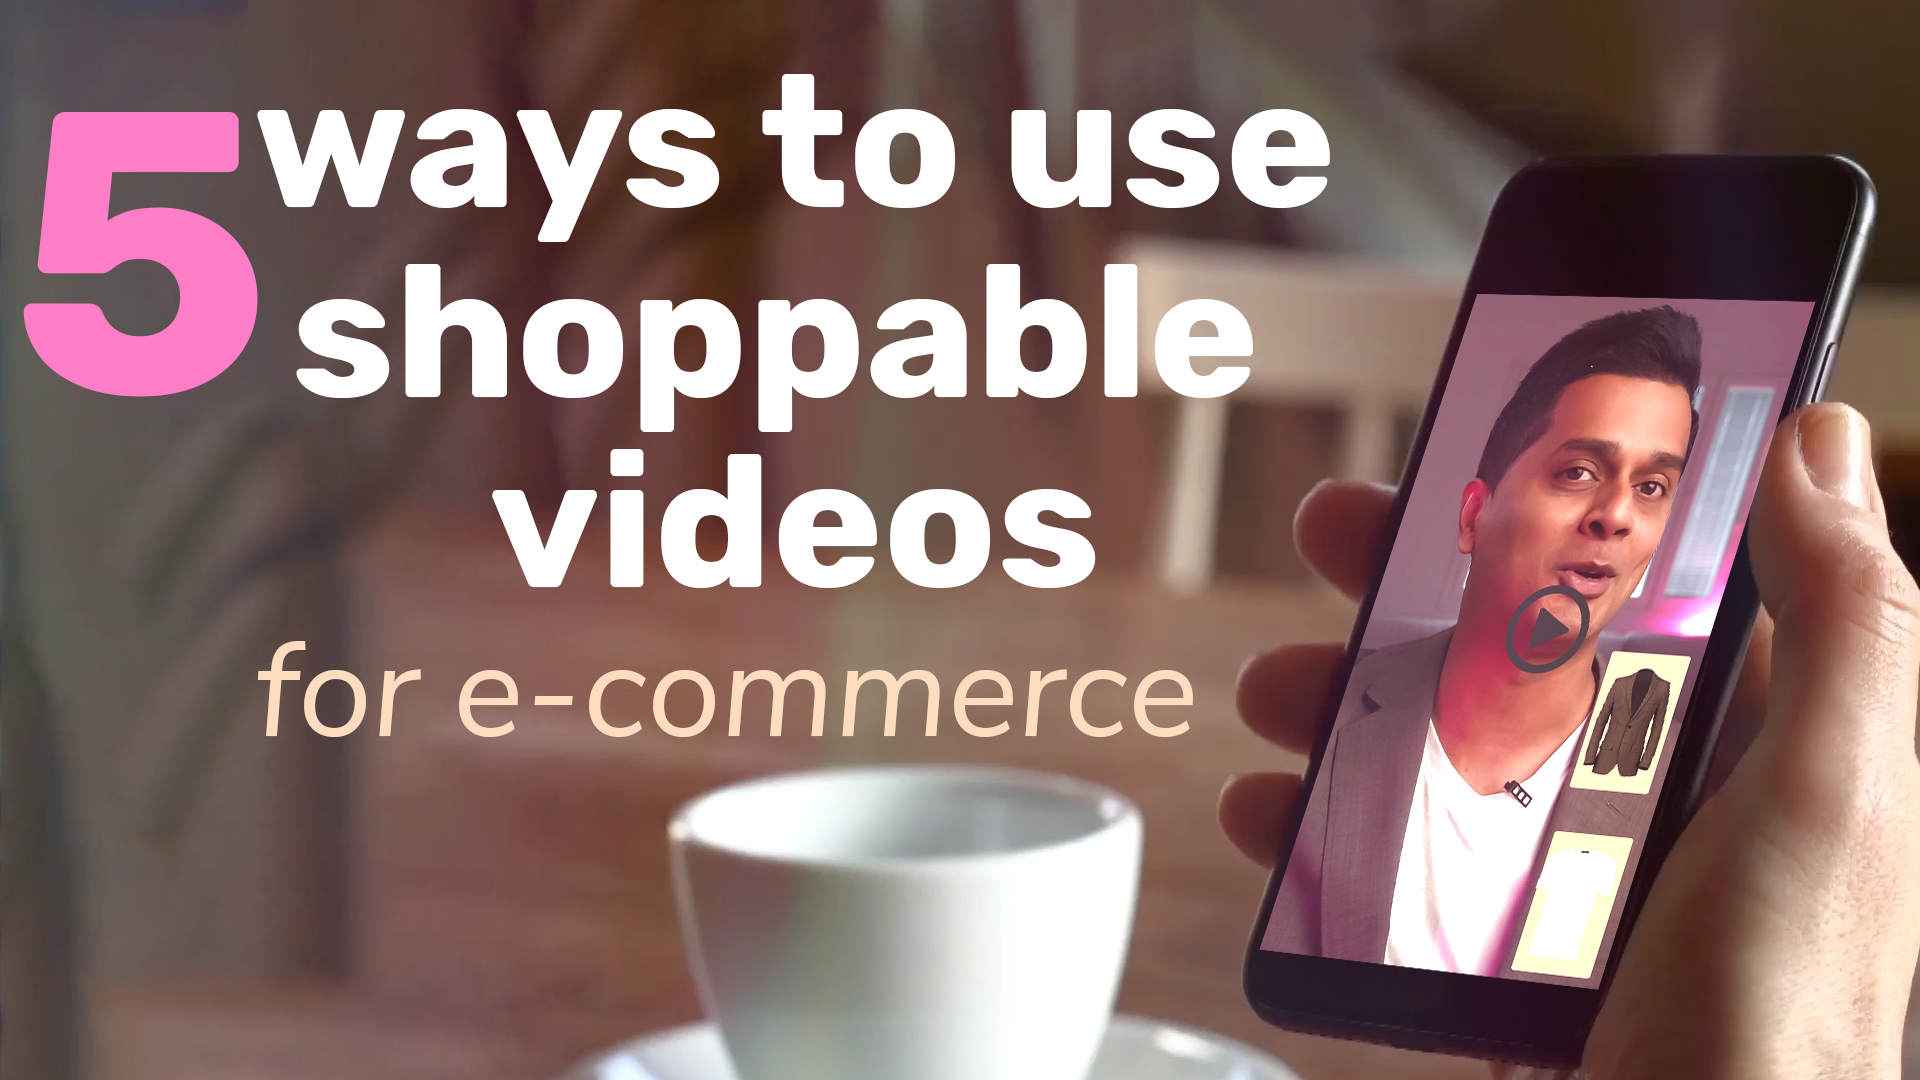 Shoppable videos are a trend that every e-commerce business should make use!